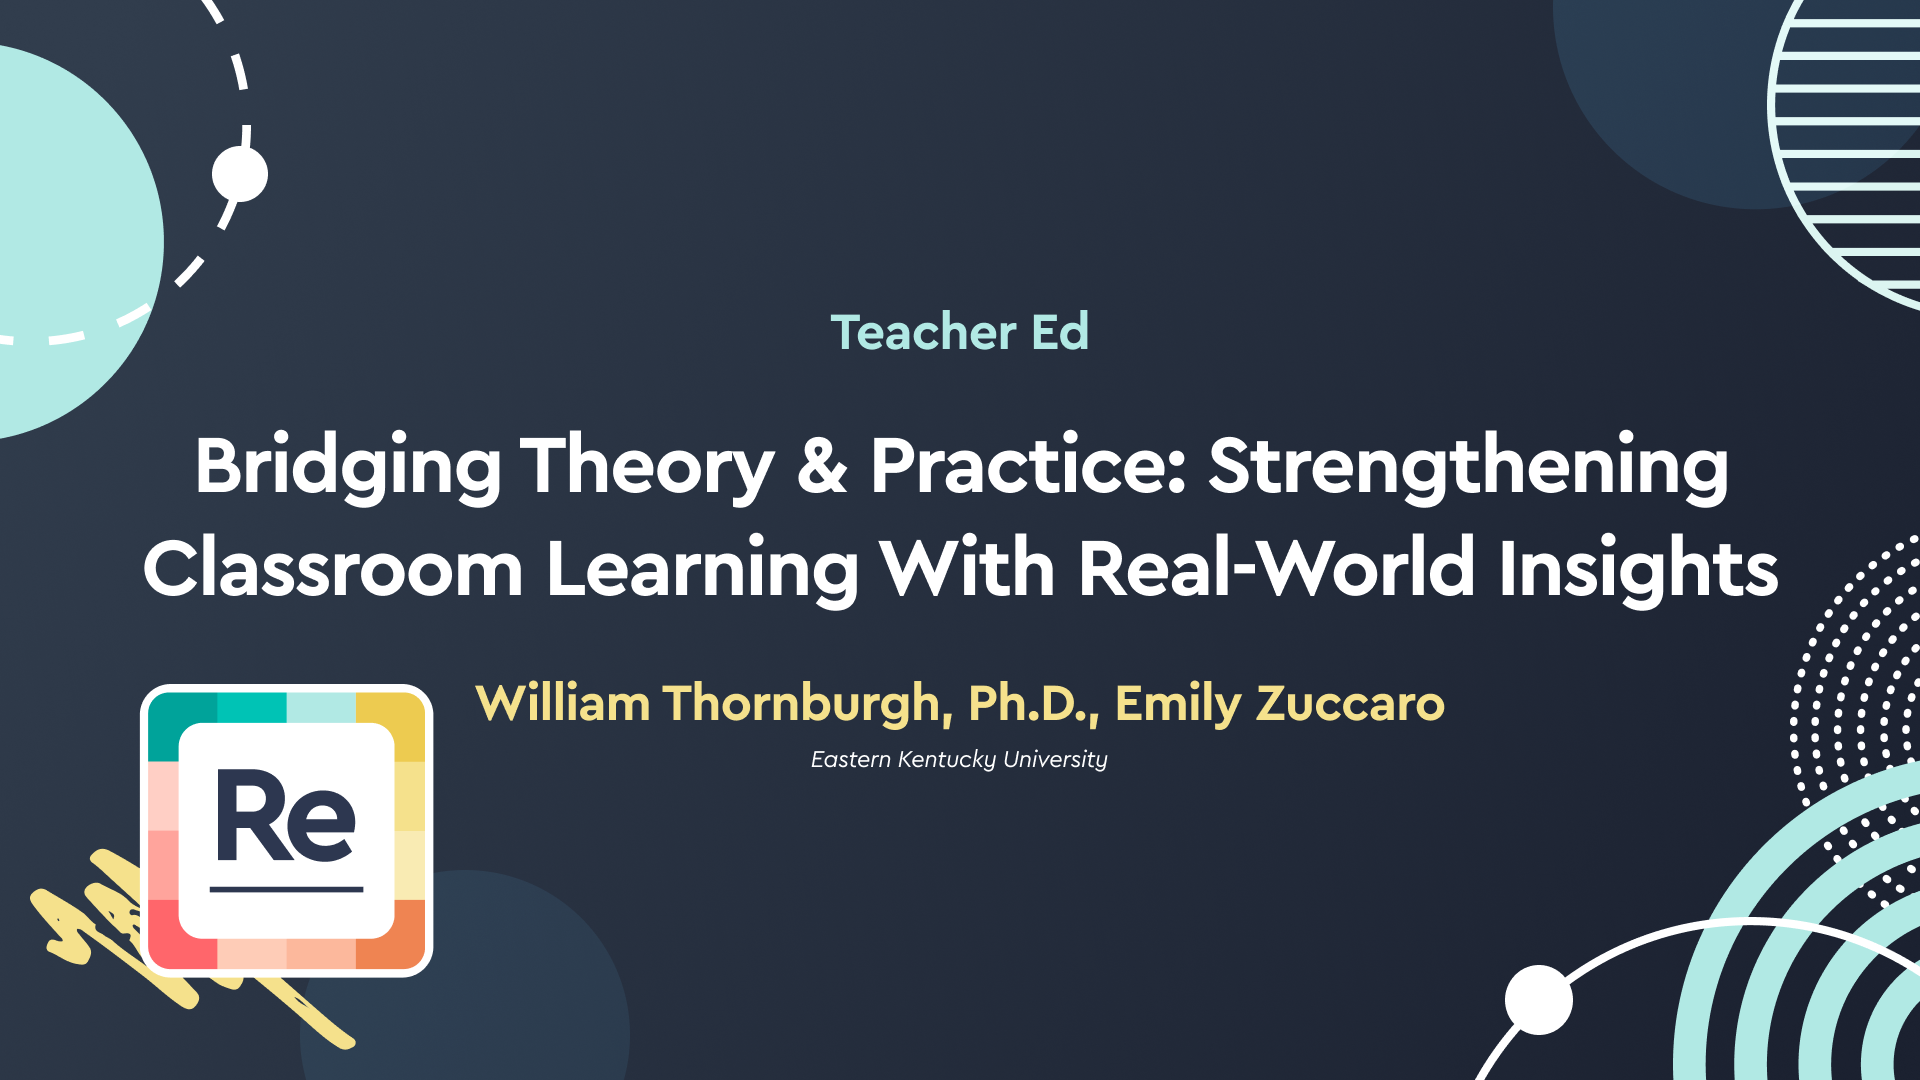 Bridging Theory & Practice: Strengthening Classroom Learning With Real-World Insights